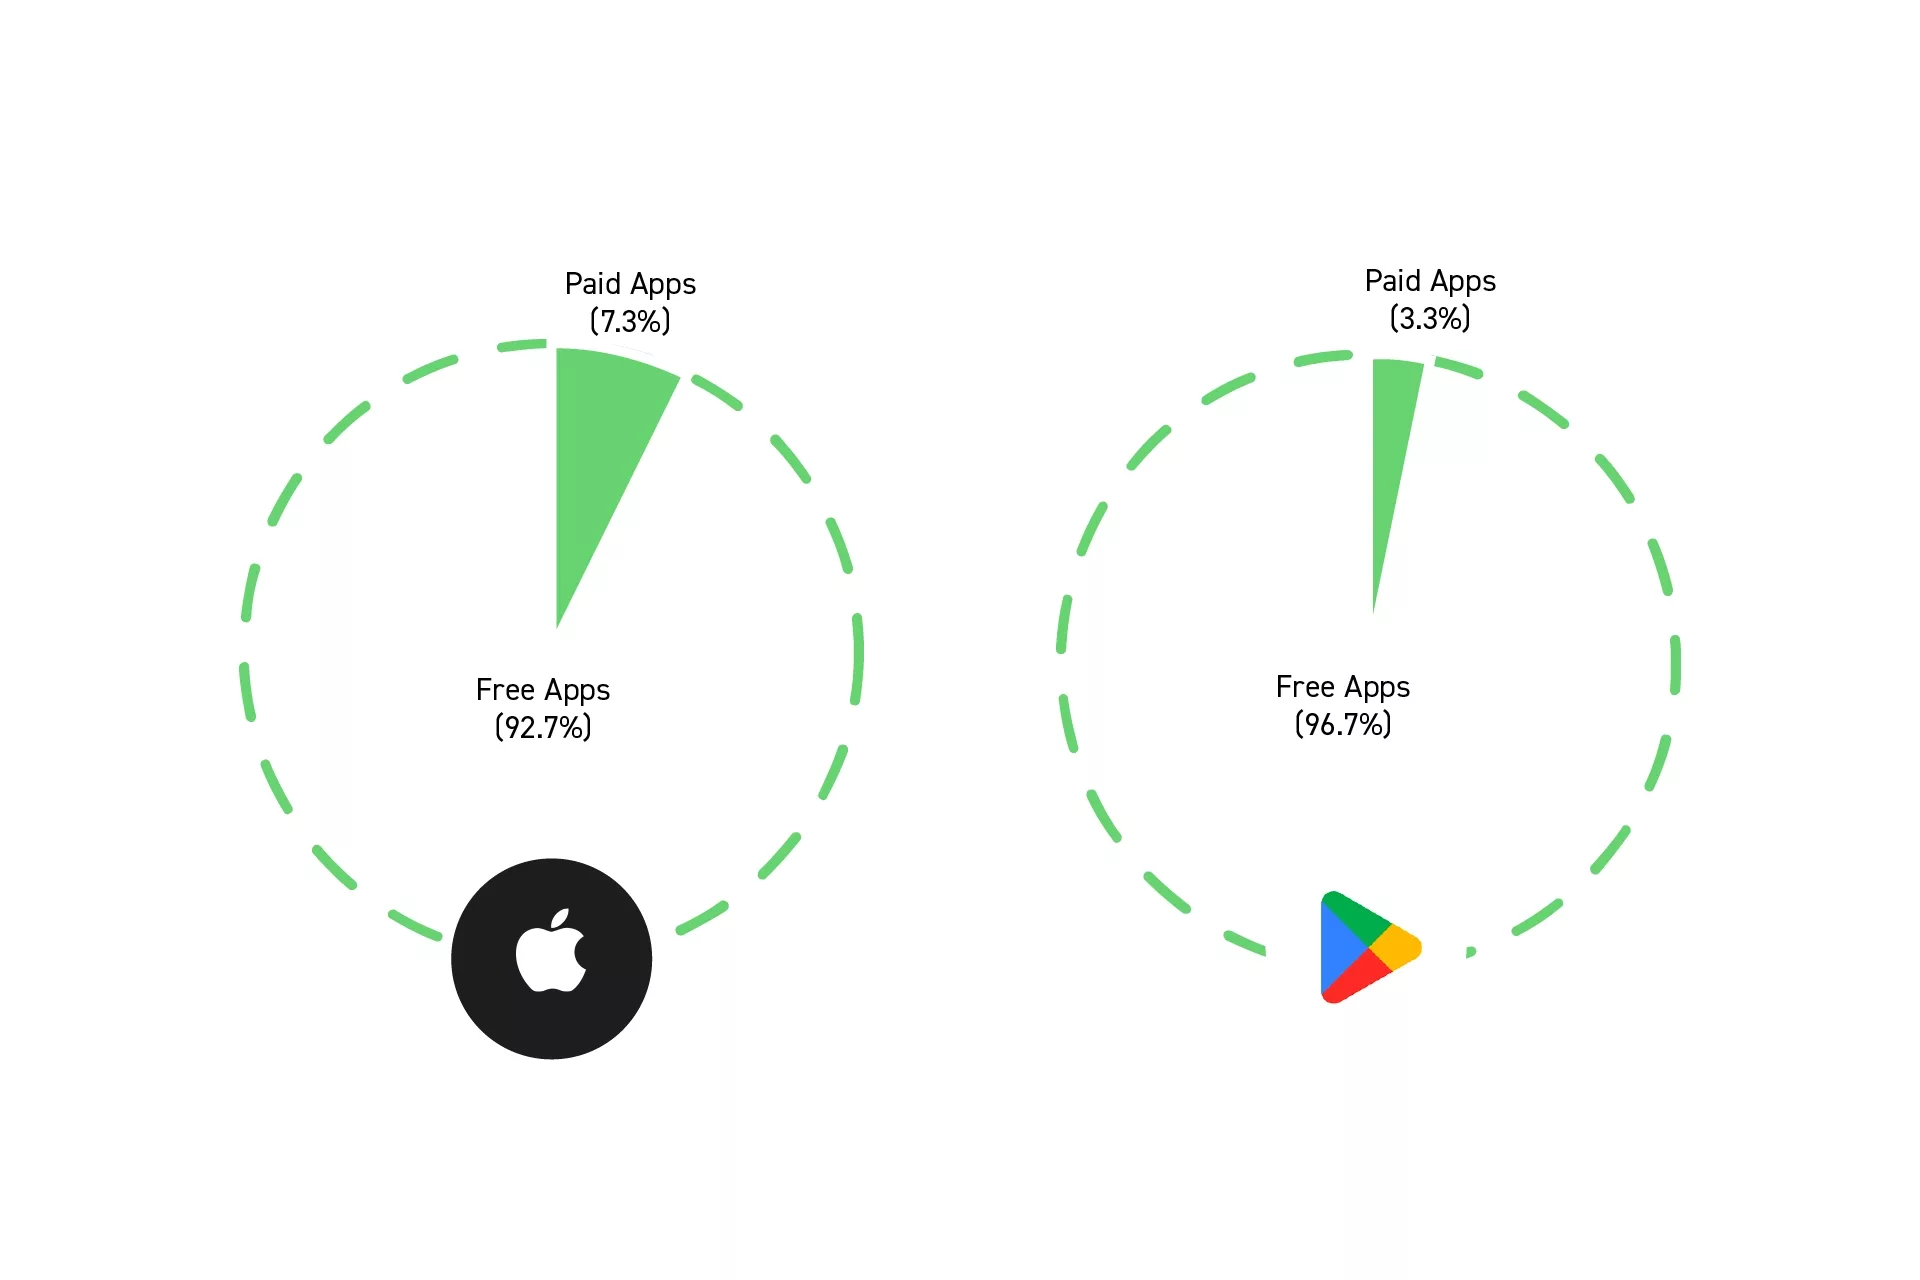 92.7% of the Apple App Store apps are free, 7.3% are paid. 96.7% of the Google Play Store apps are free, 3.3% are paid.